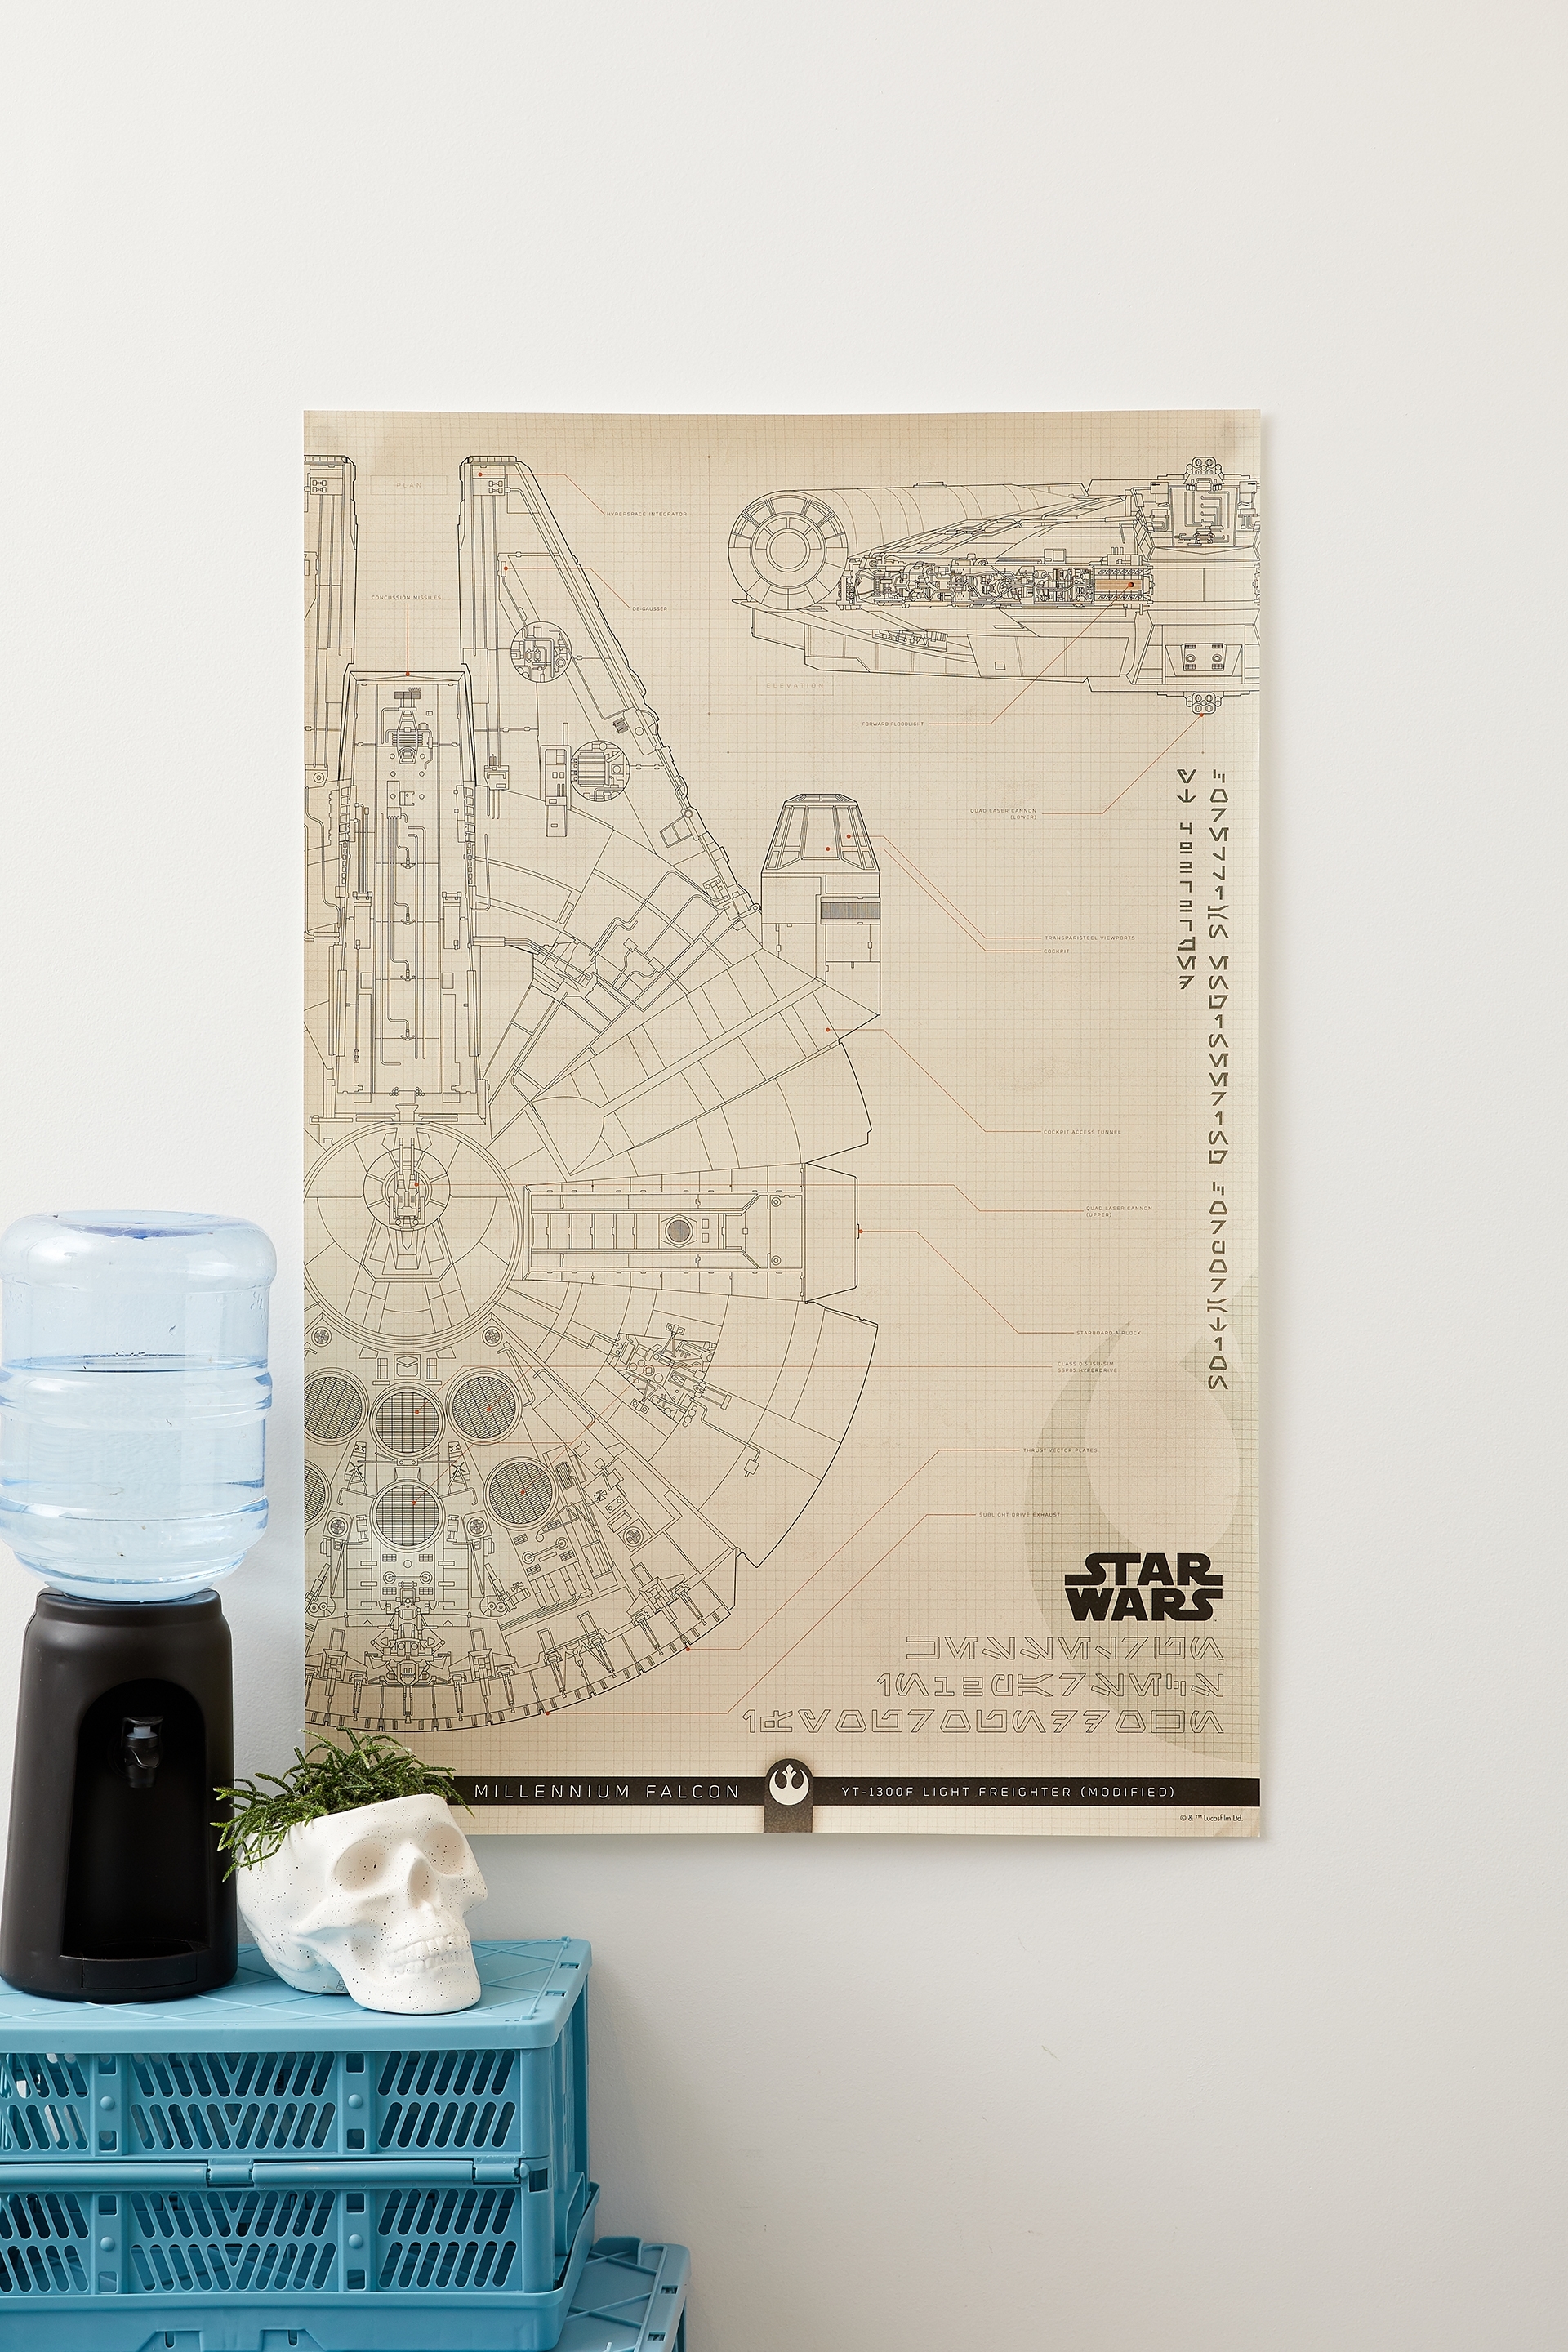 Typo - Star Wars Hang Out Poster - Lcn luc millenium falcon